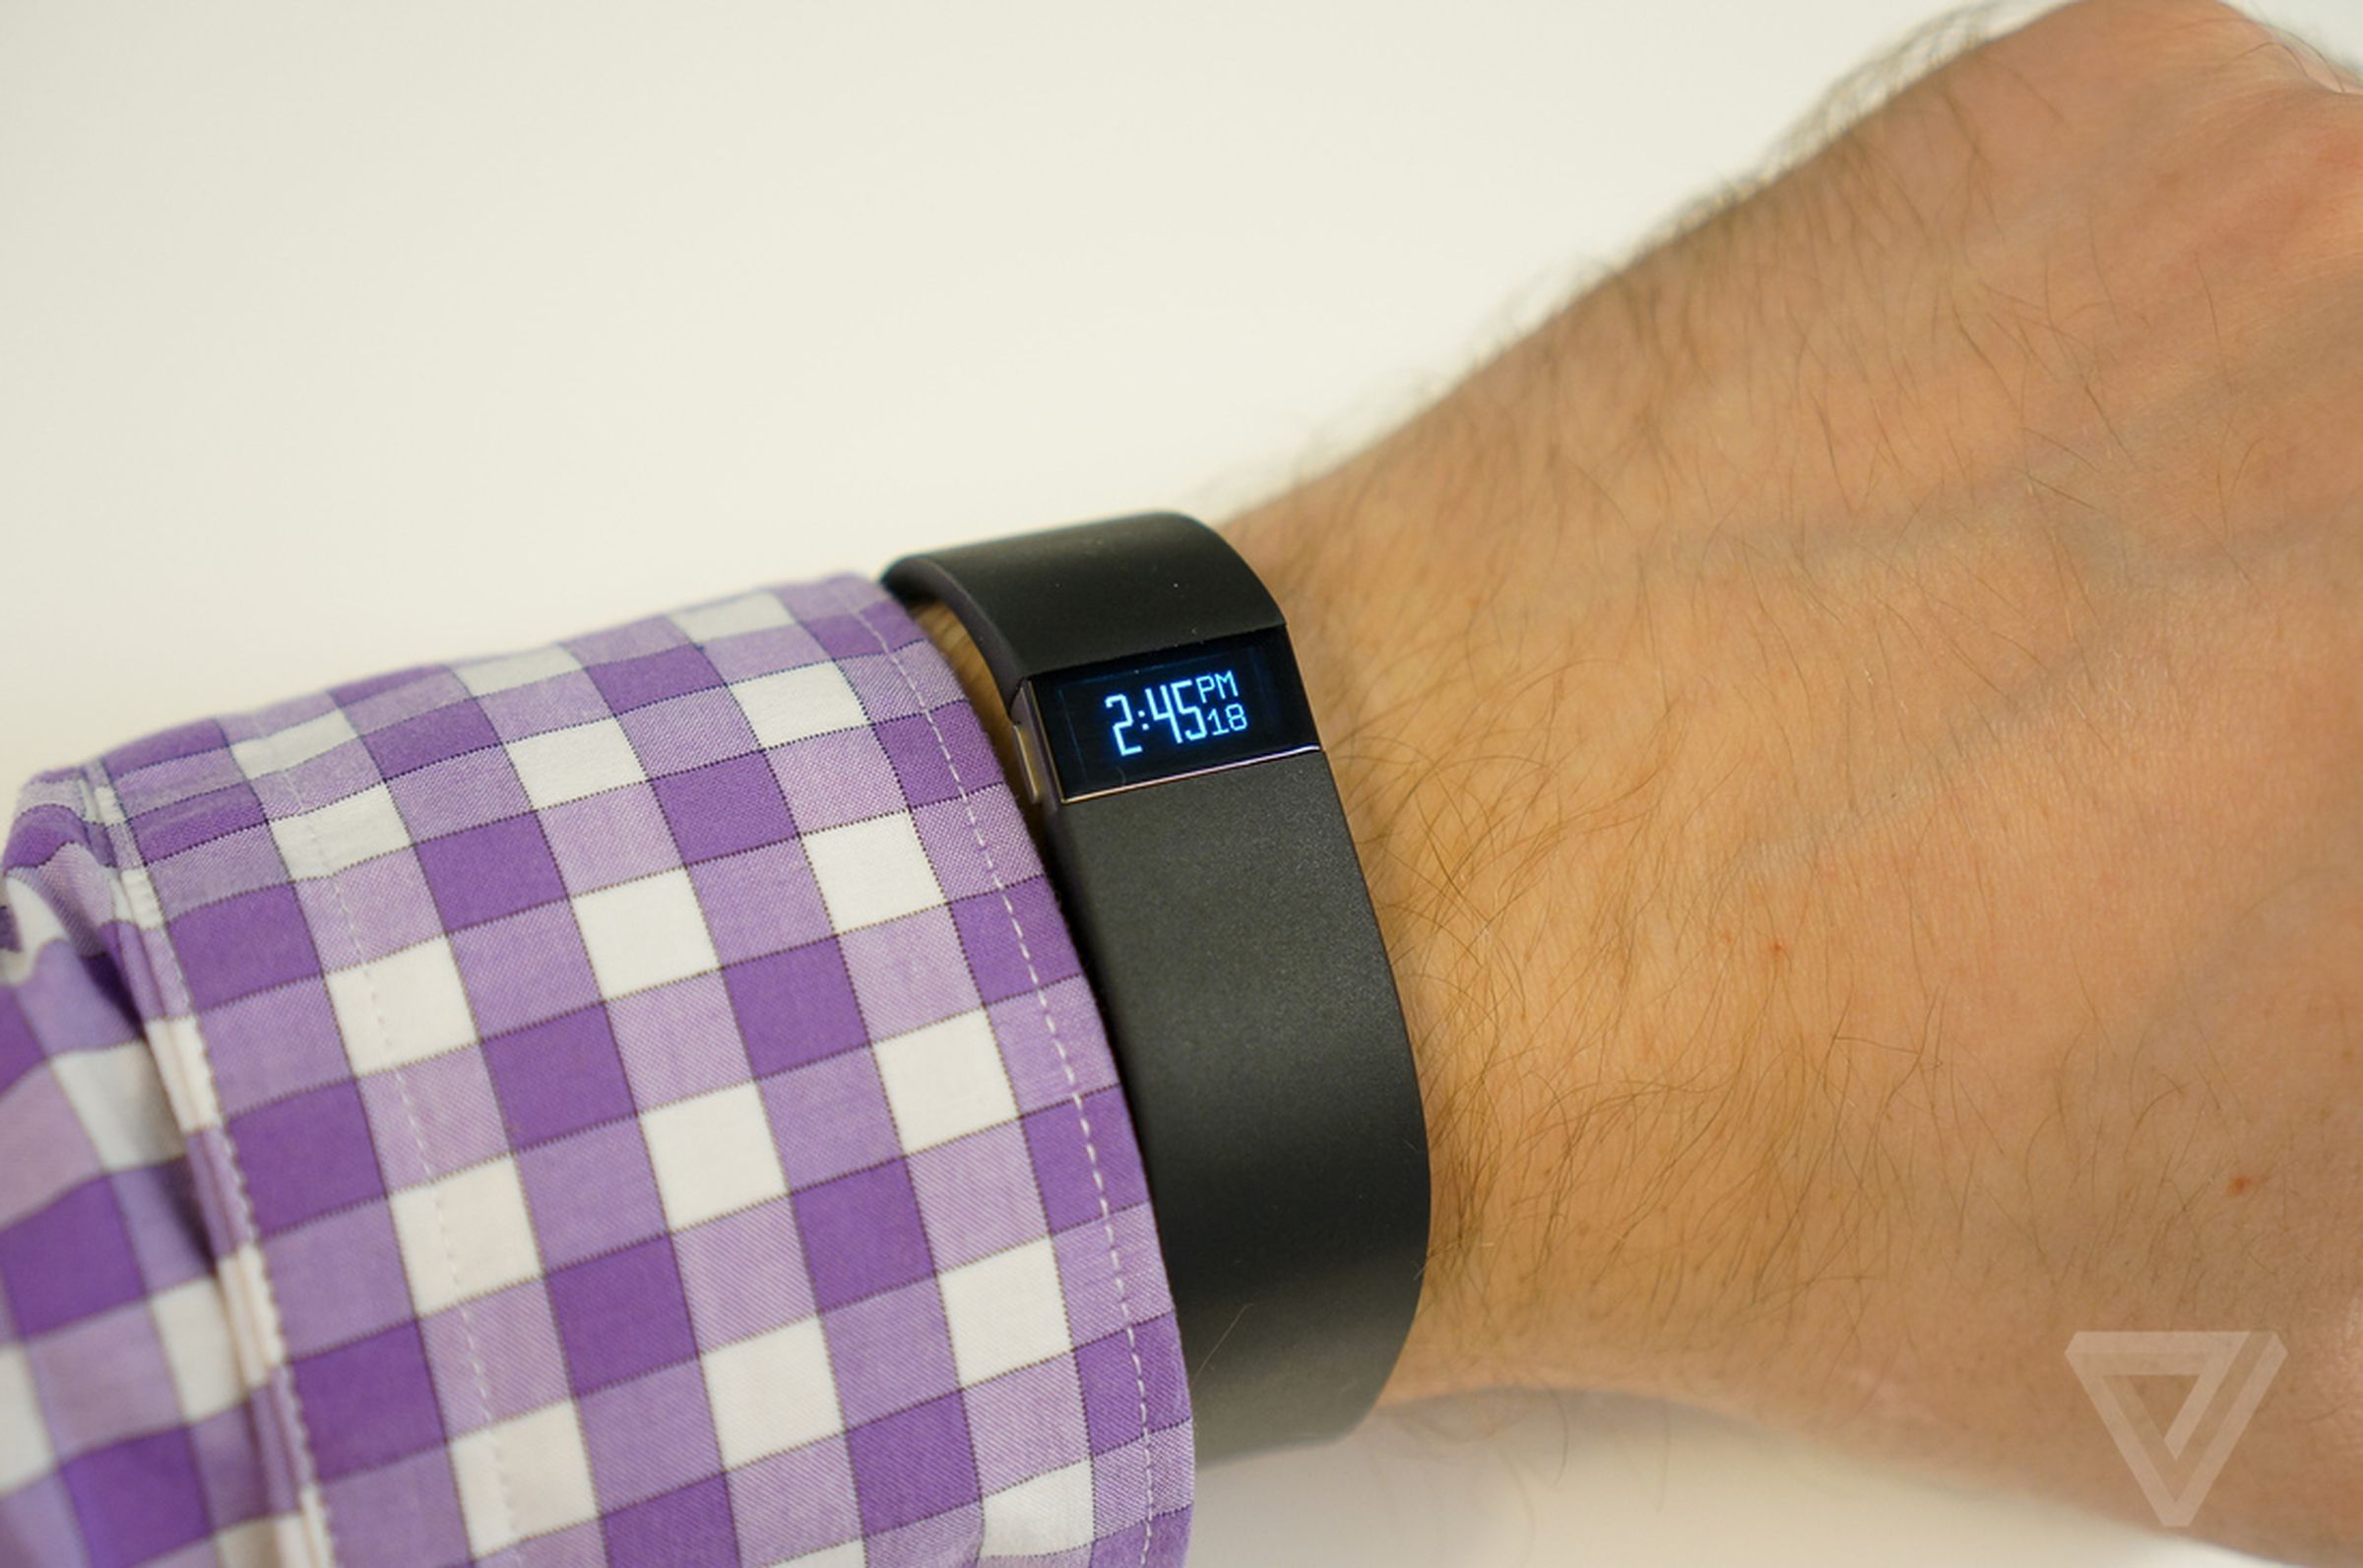 Fitbit Force images